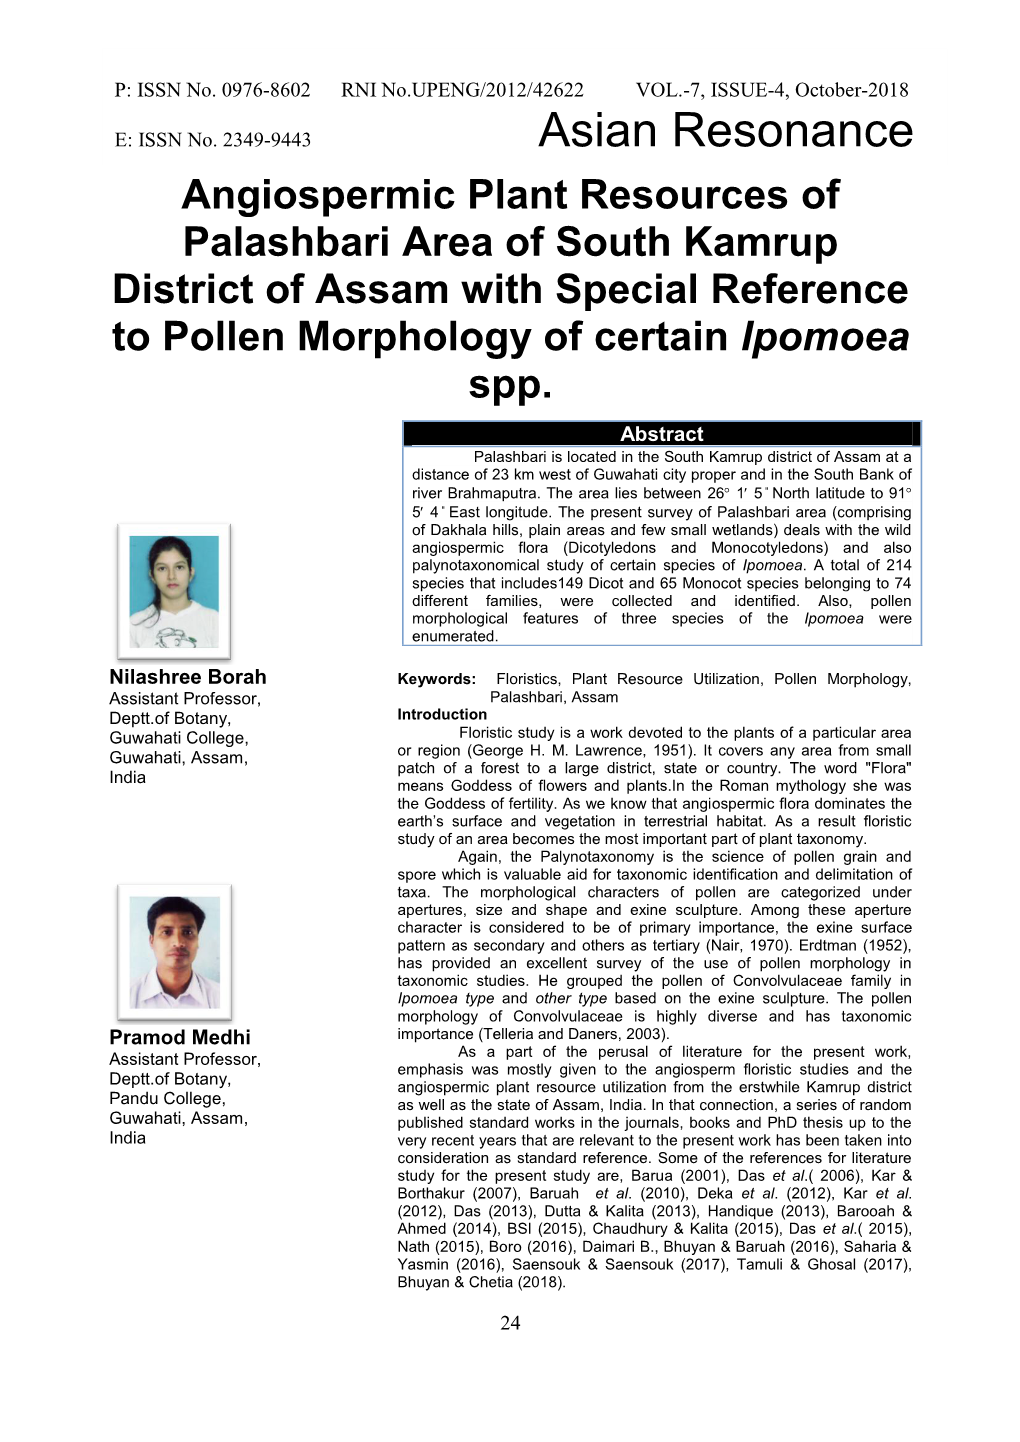 Angiospermic Plant Resources of Palashbari Area of South Kamrup District of Assam with Special Reference to Pollen Morphology of Certain Ipomoea Spp